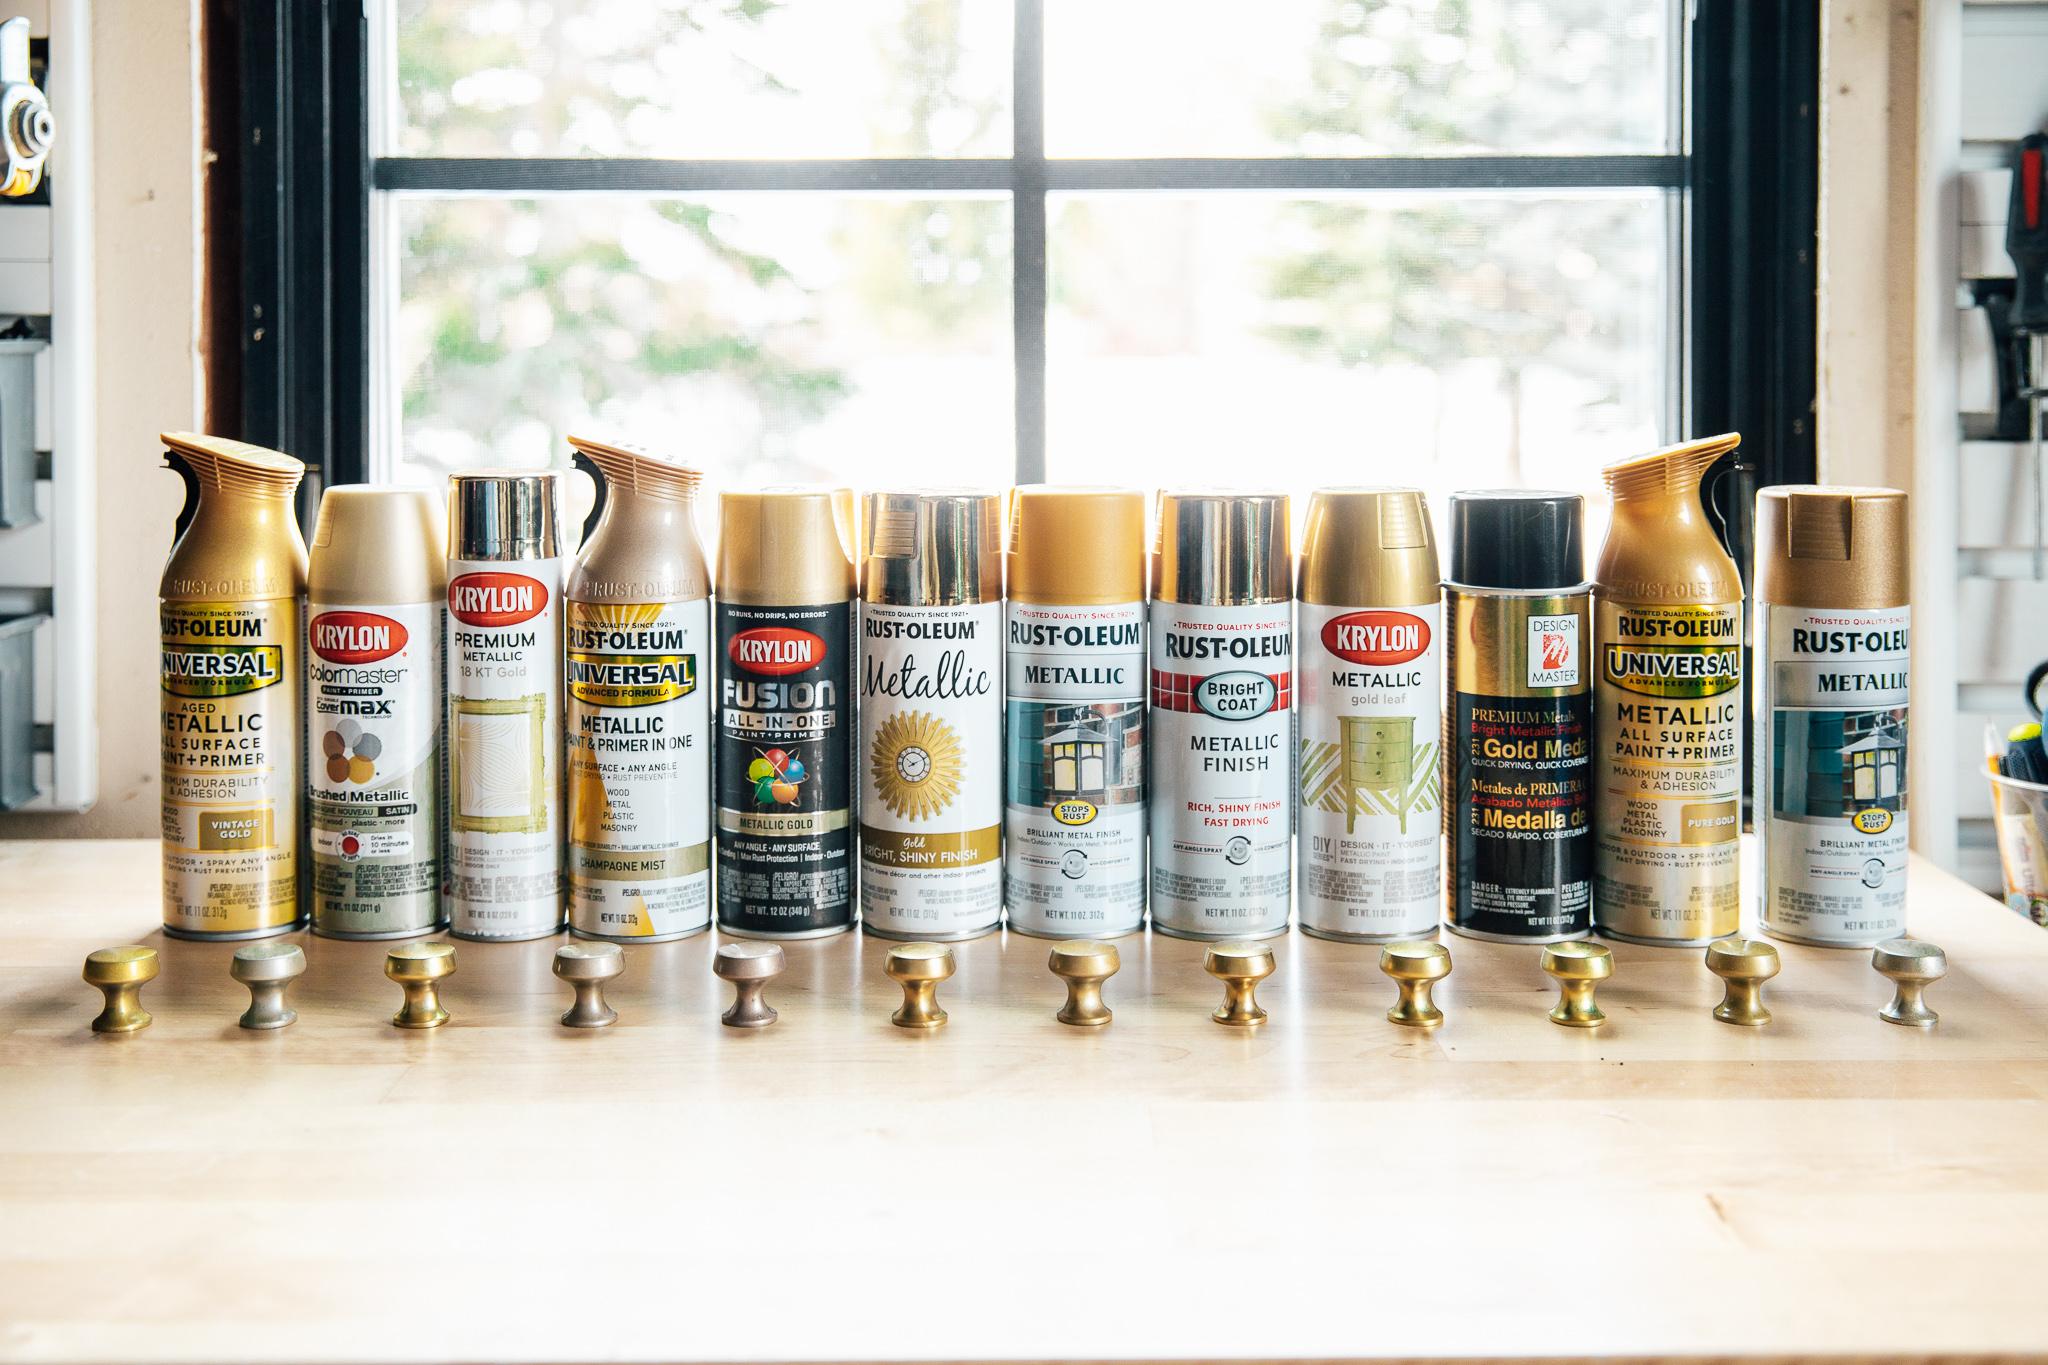 Montana GOLD Classic Colors Spray Paint